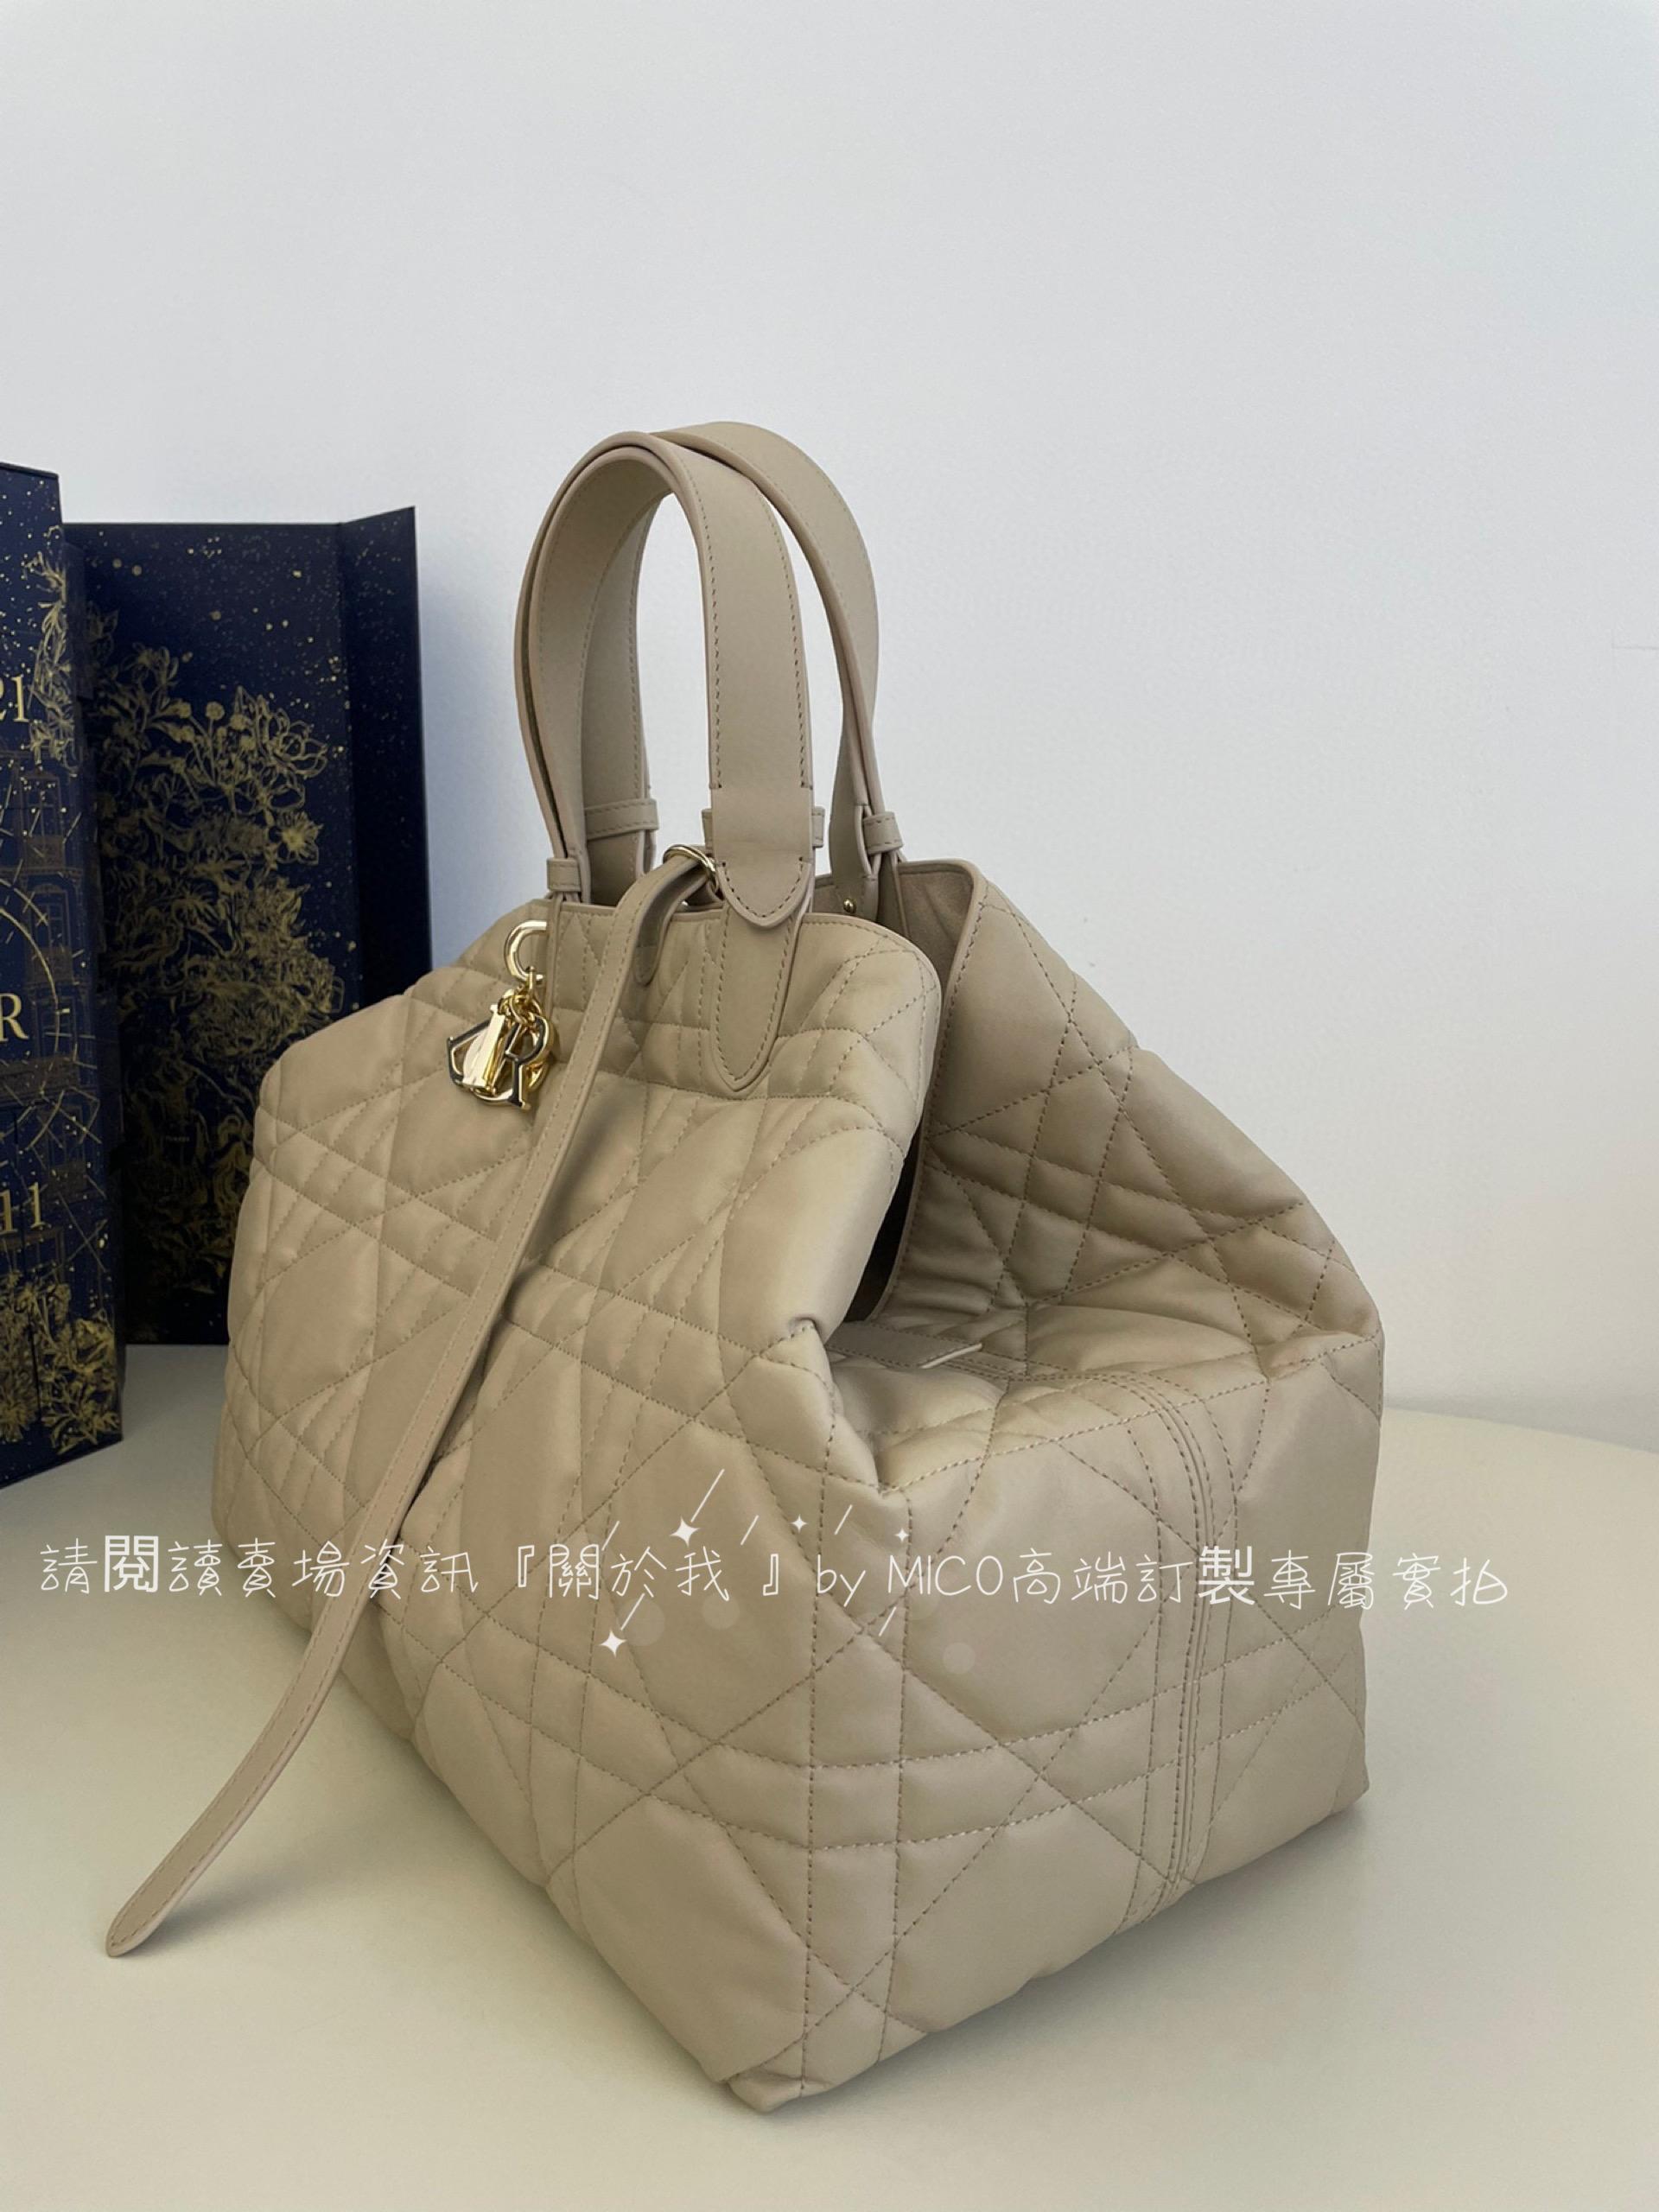 DIOR 大號/奶油杏色 Toujours 小牛皮 size:37*20*28.5cm 